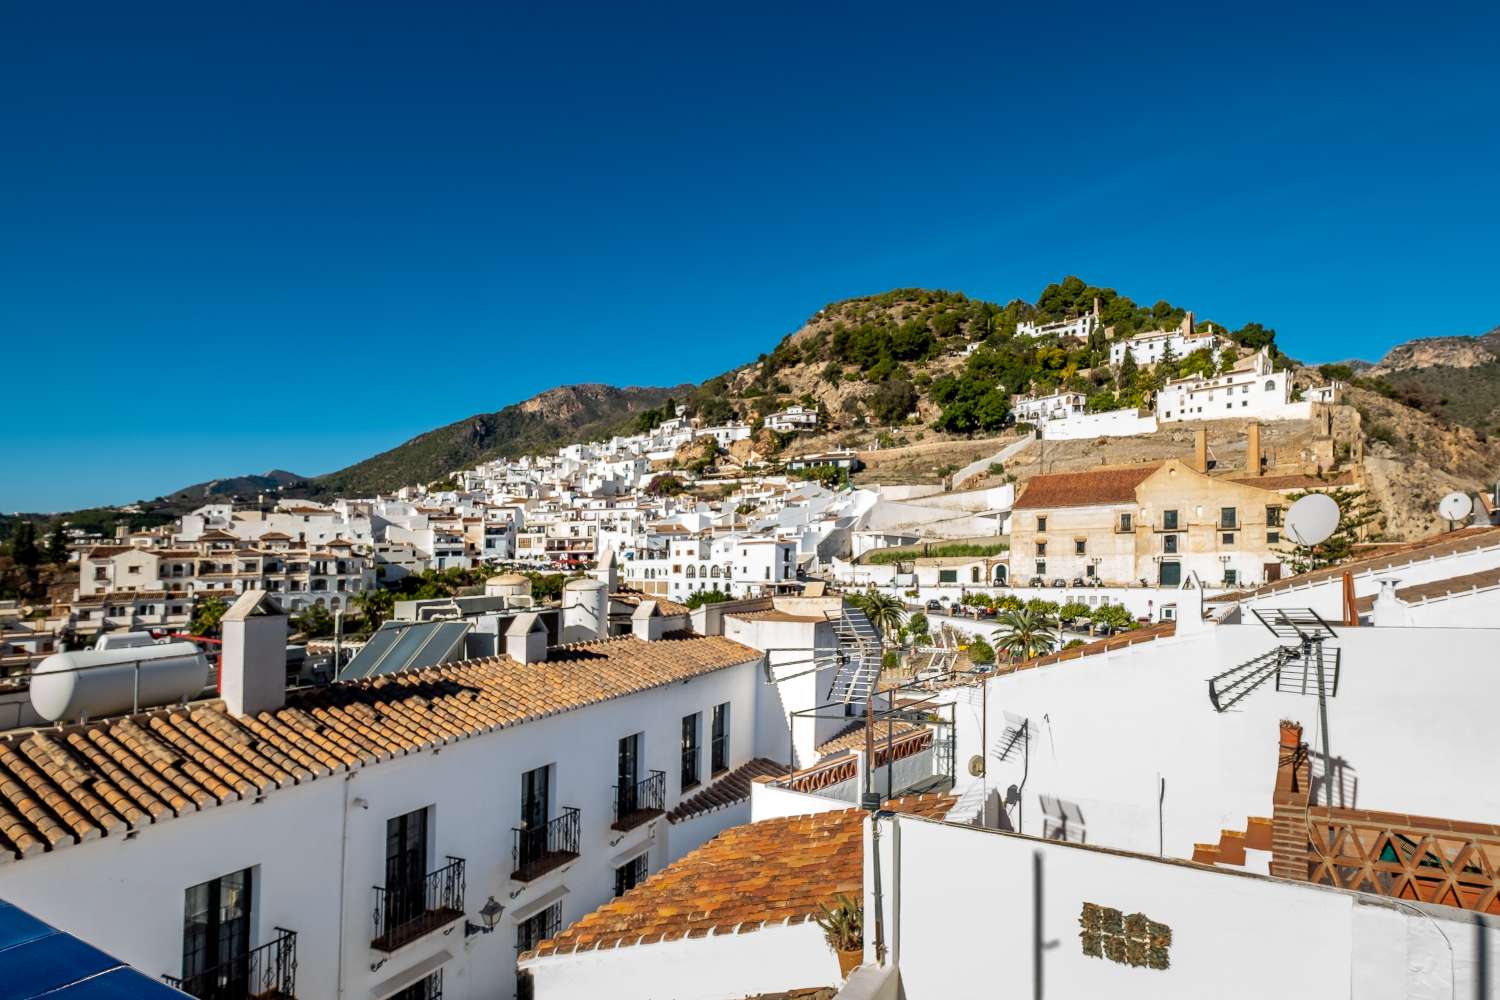 Beautiful apartment with spectacular views over Frigiliana and the mountains